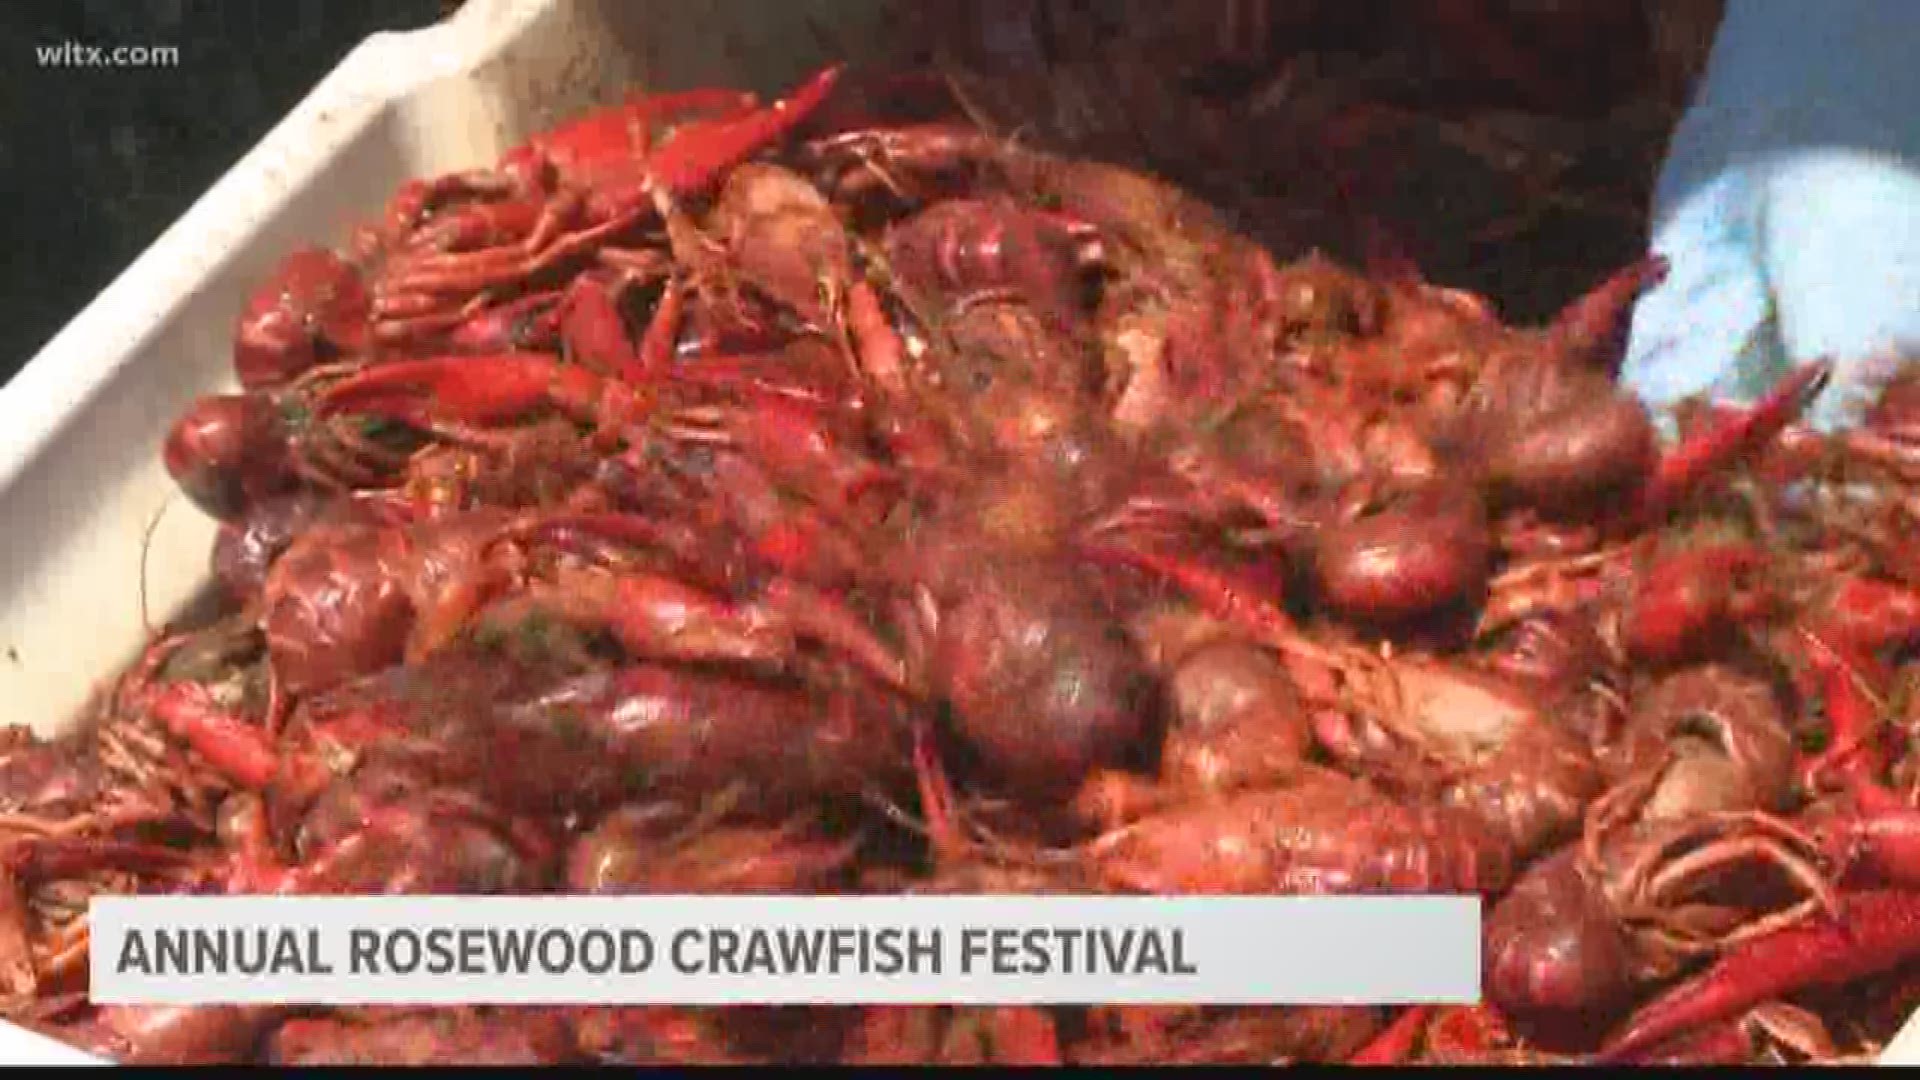 The 13th-annual Rosewood Crawfish Festival was held on Saturday.